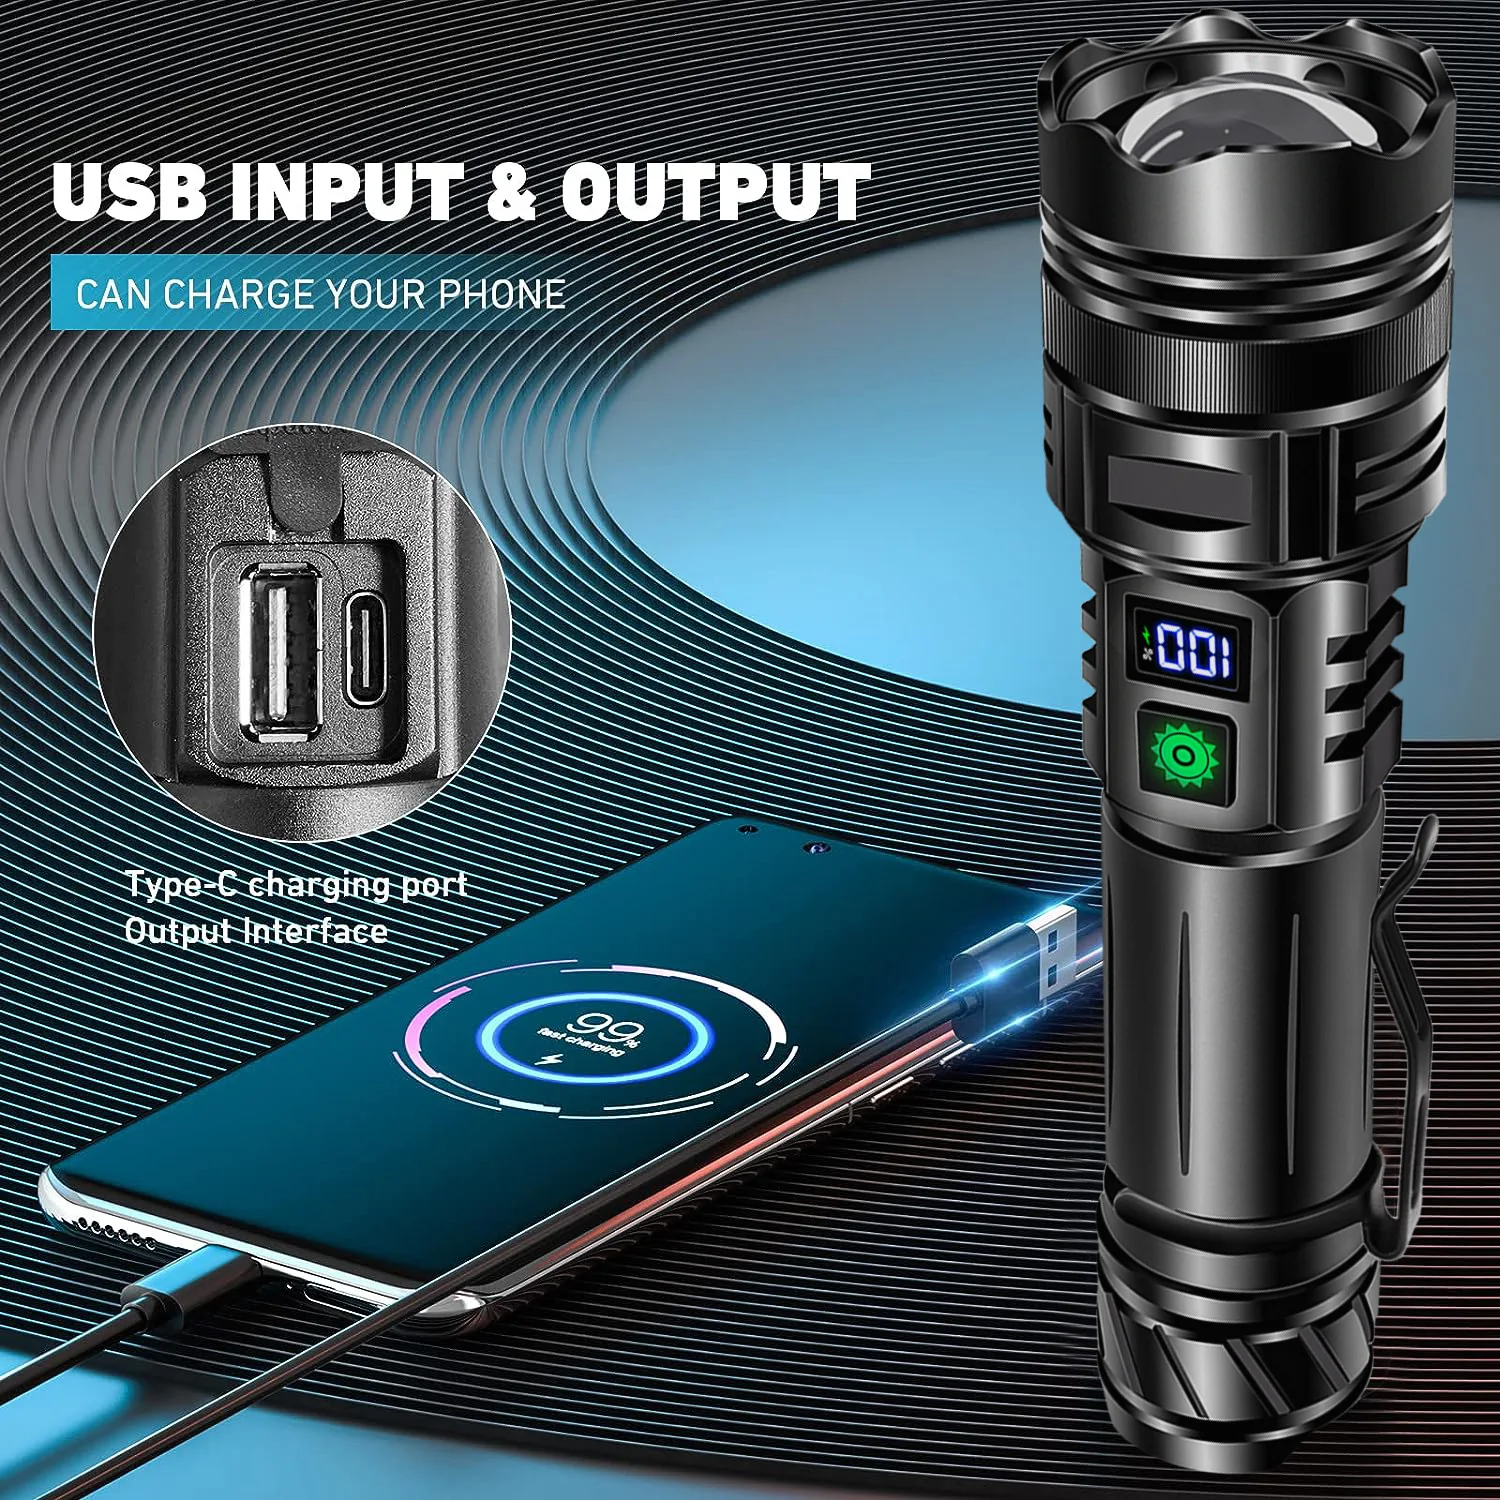 High Power LED Flashlight Type-C USB Rechargeable Long Range Tactical Torch Strong Light Lamp Outdoor Ultra Powerful Flash Light